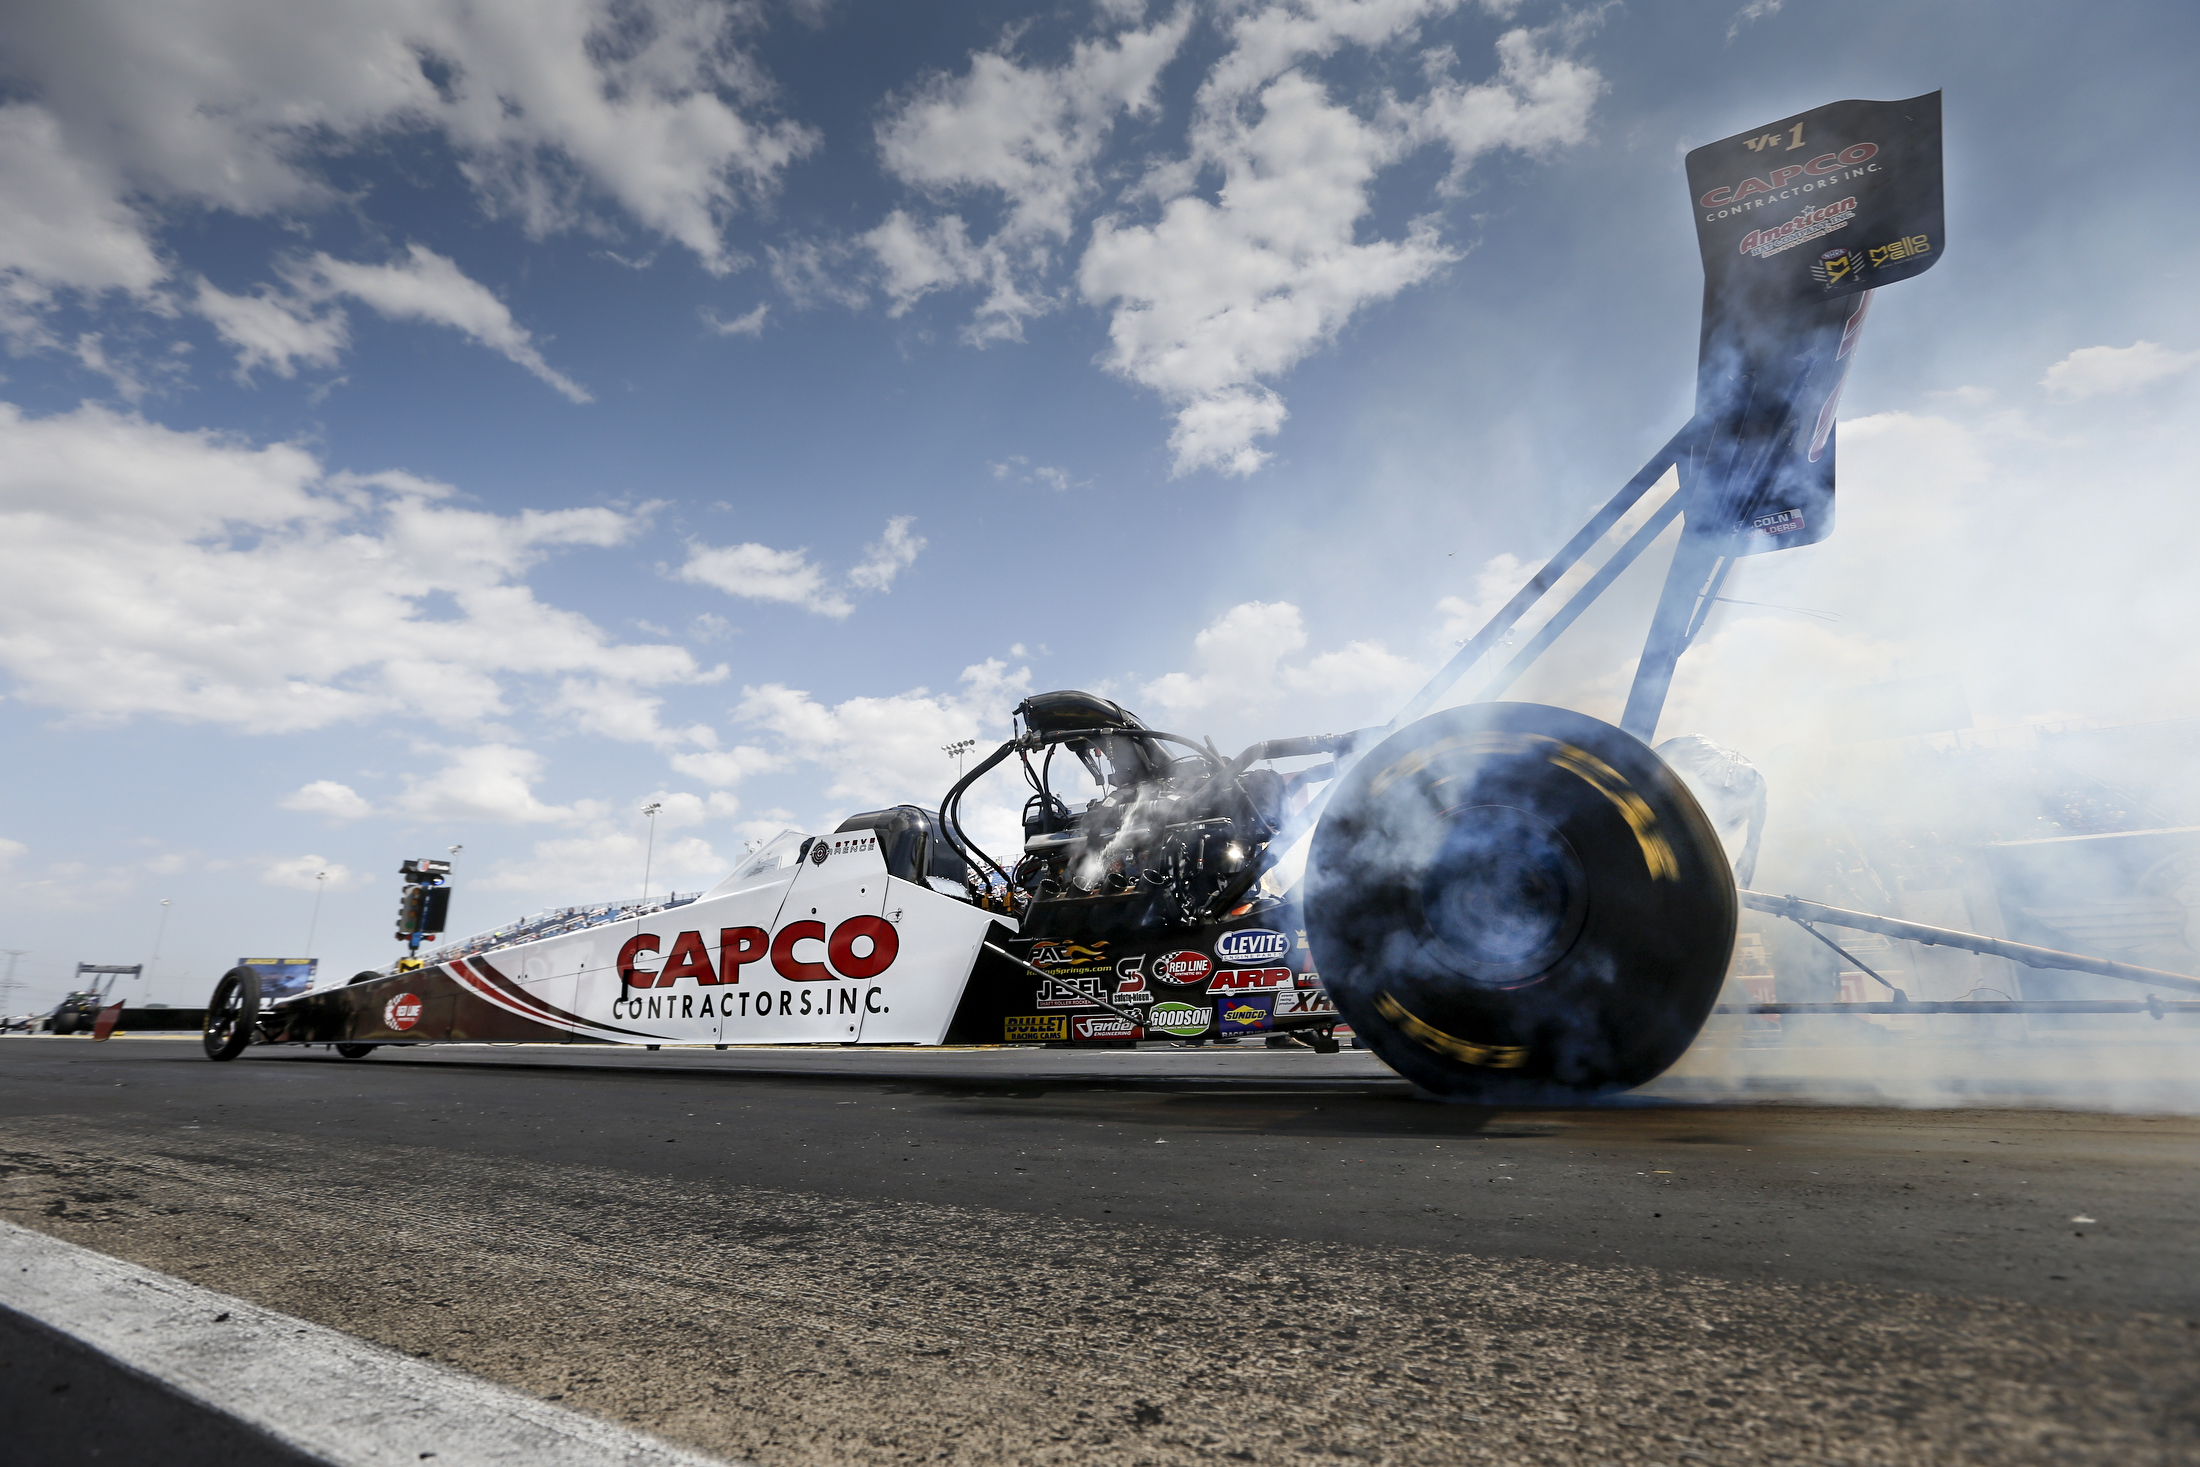 Top Fuel Dragster pilot Steve Torrence warming up on Sunday at the Route 66 NHRA Nationals